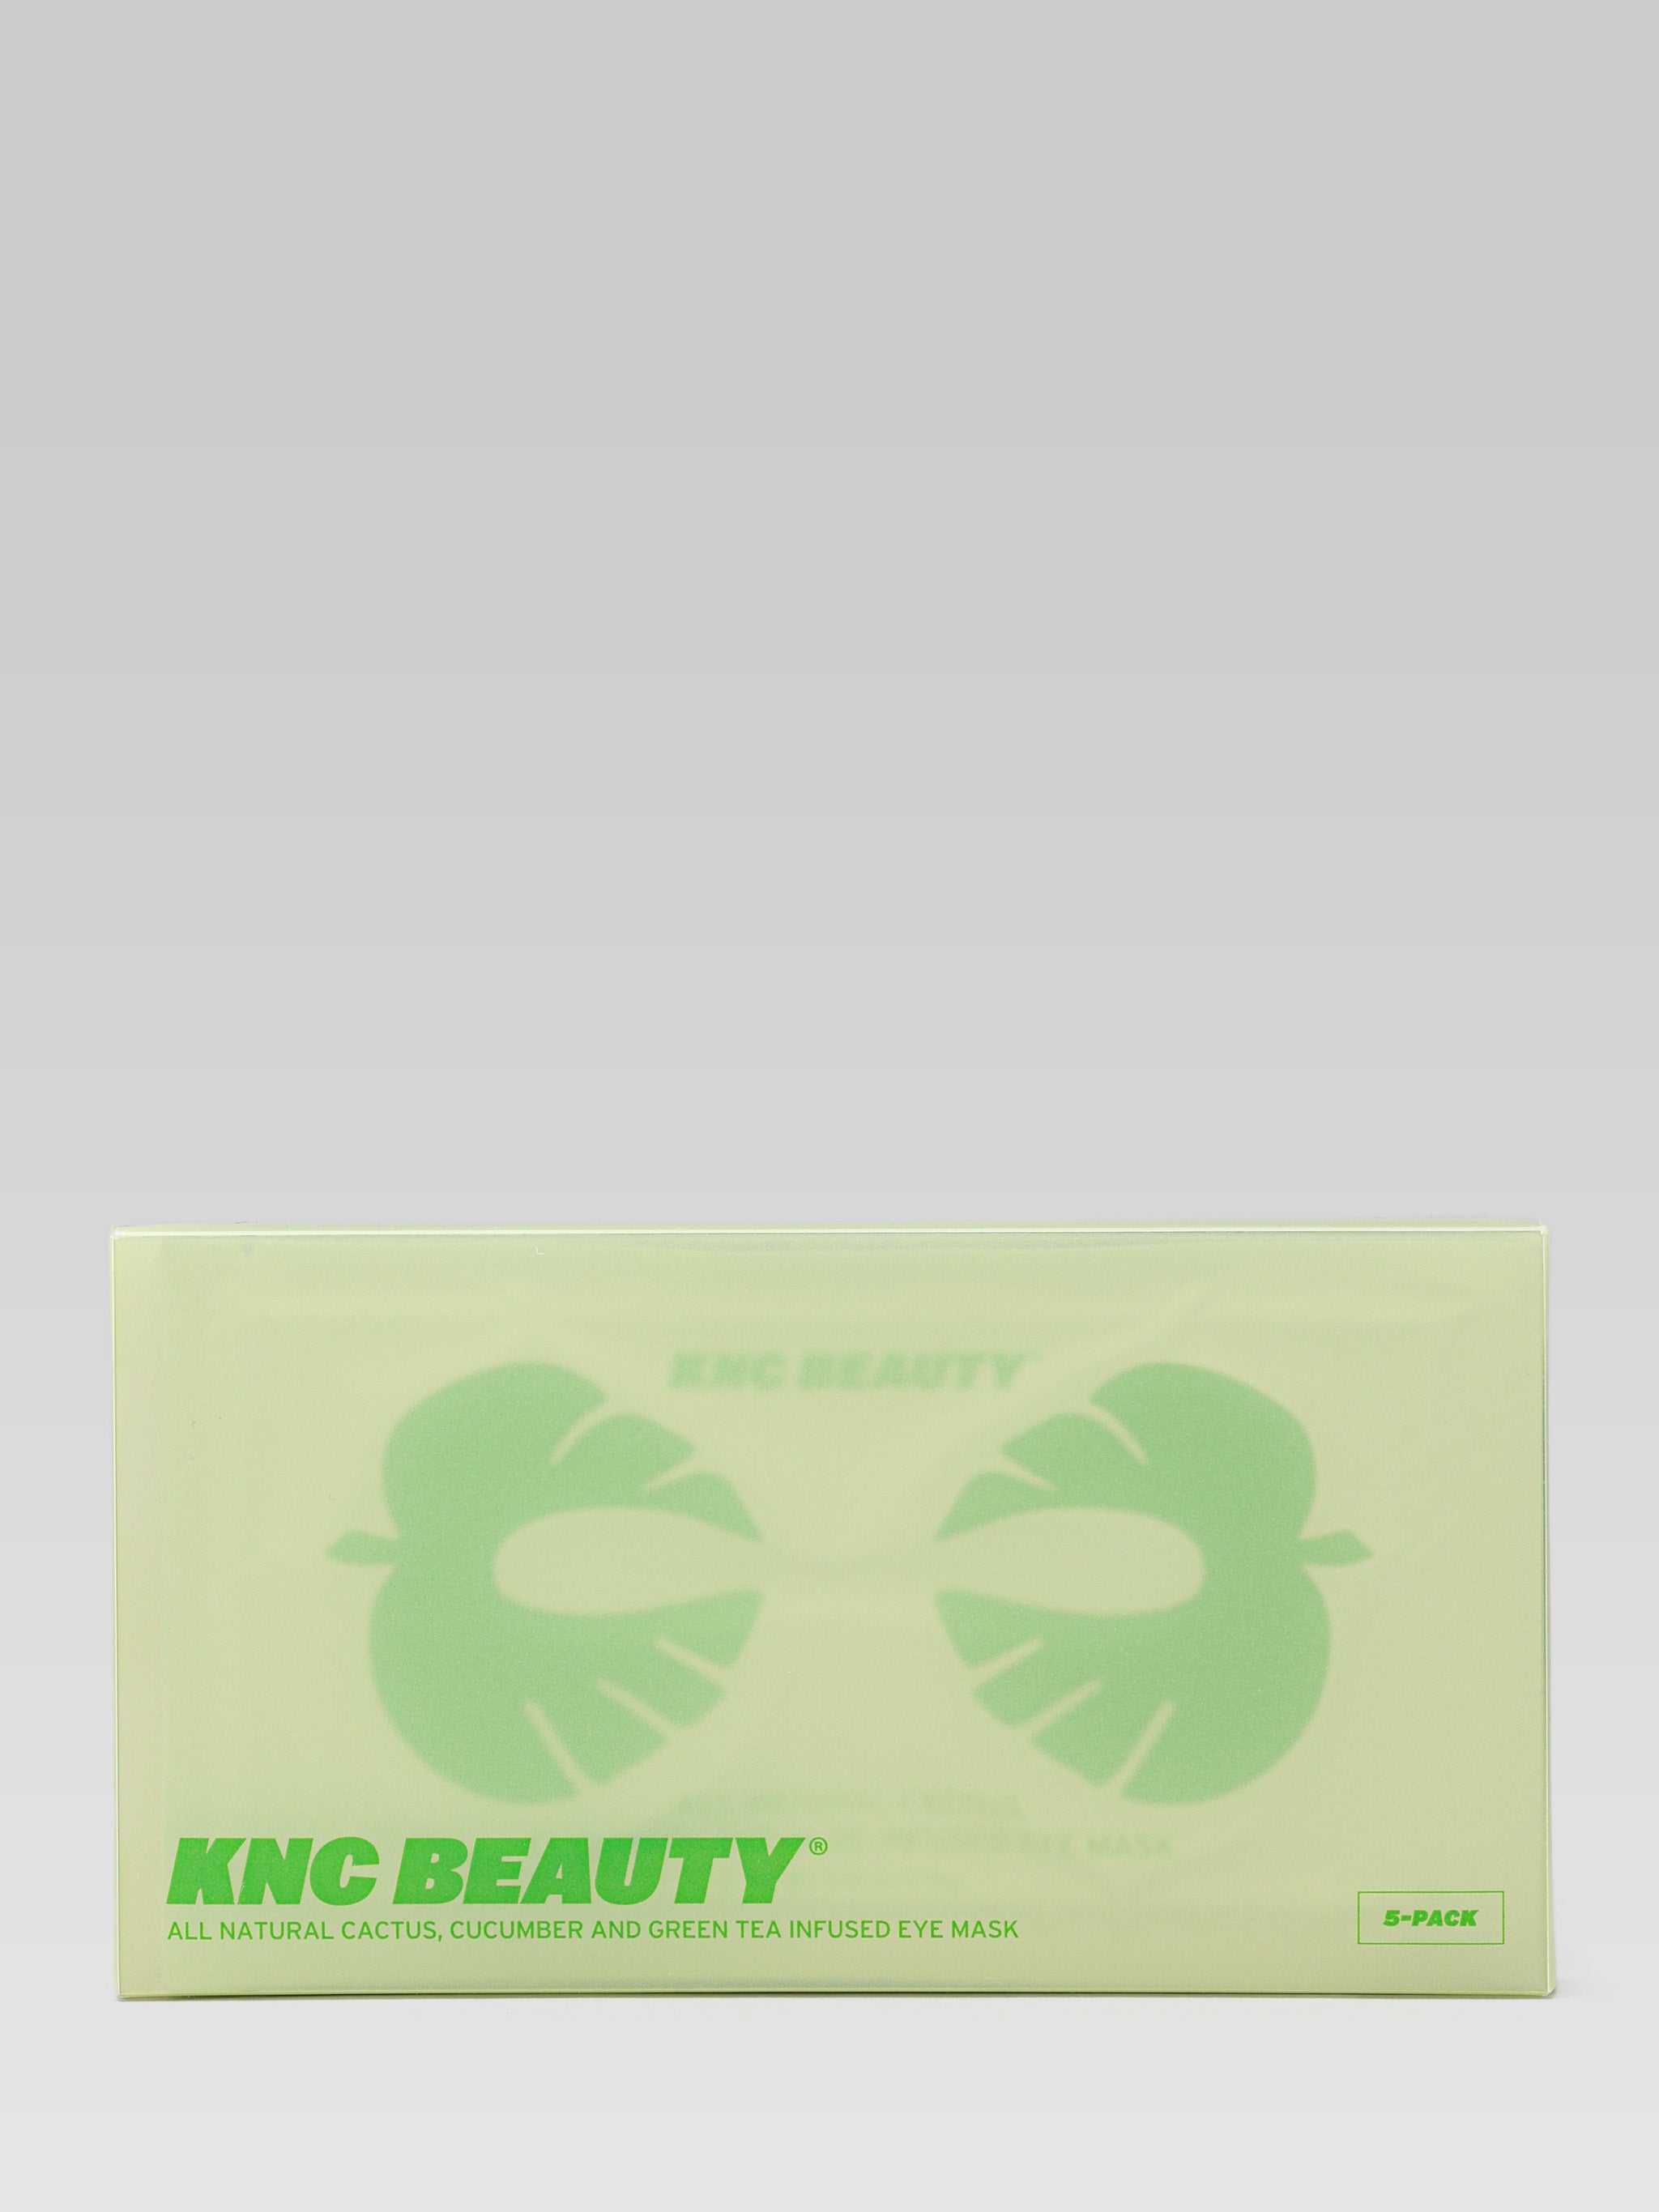 KNC BEAUTY Cactus, Cucumber and Green Tea Infused Eye Mask product packaging